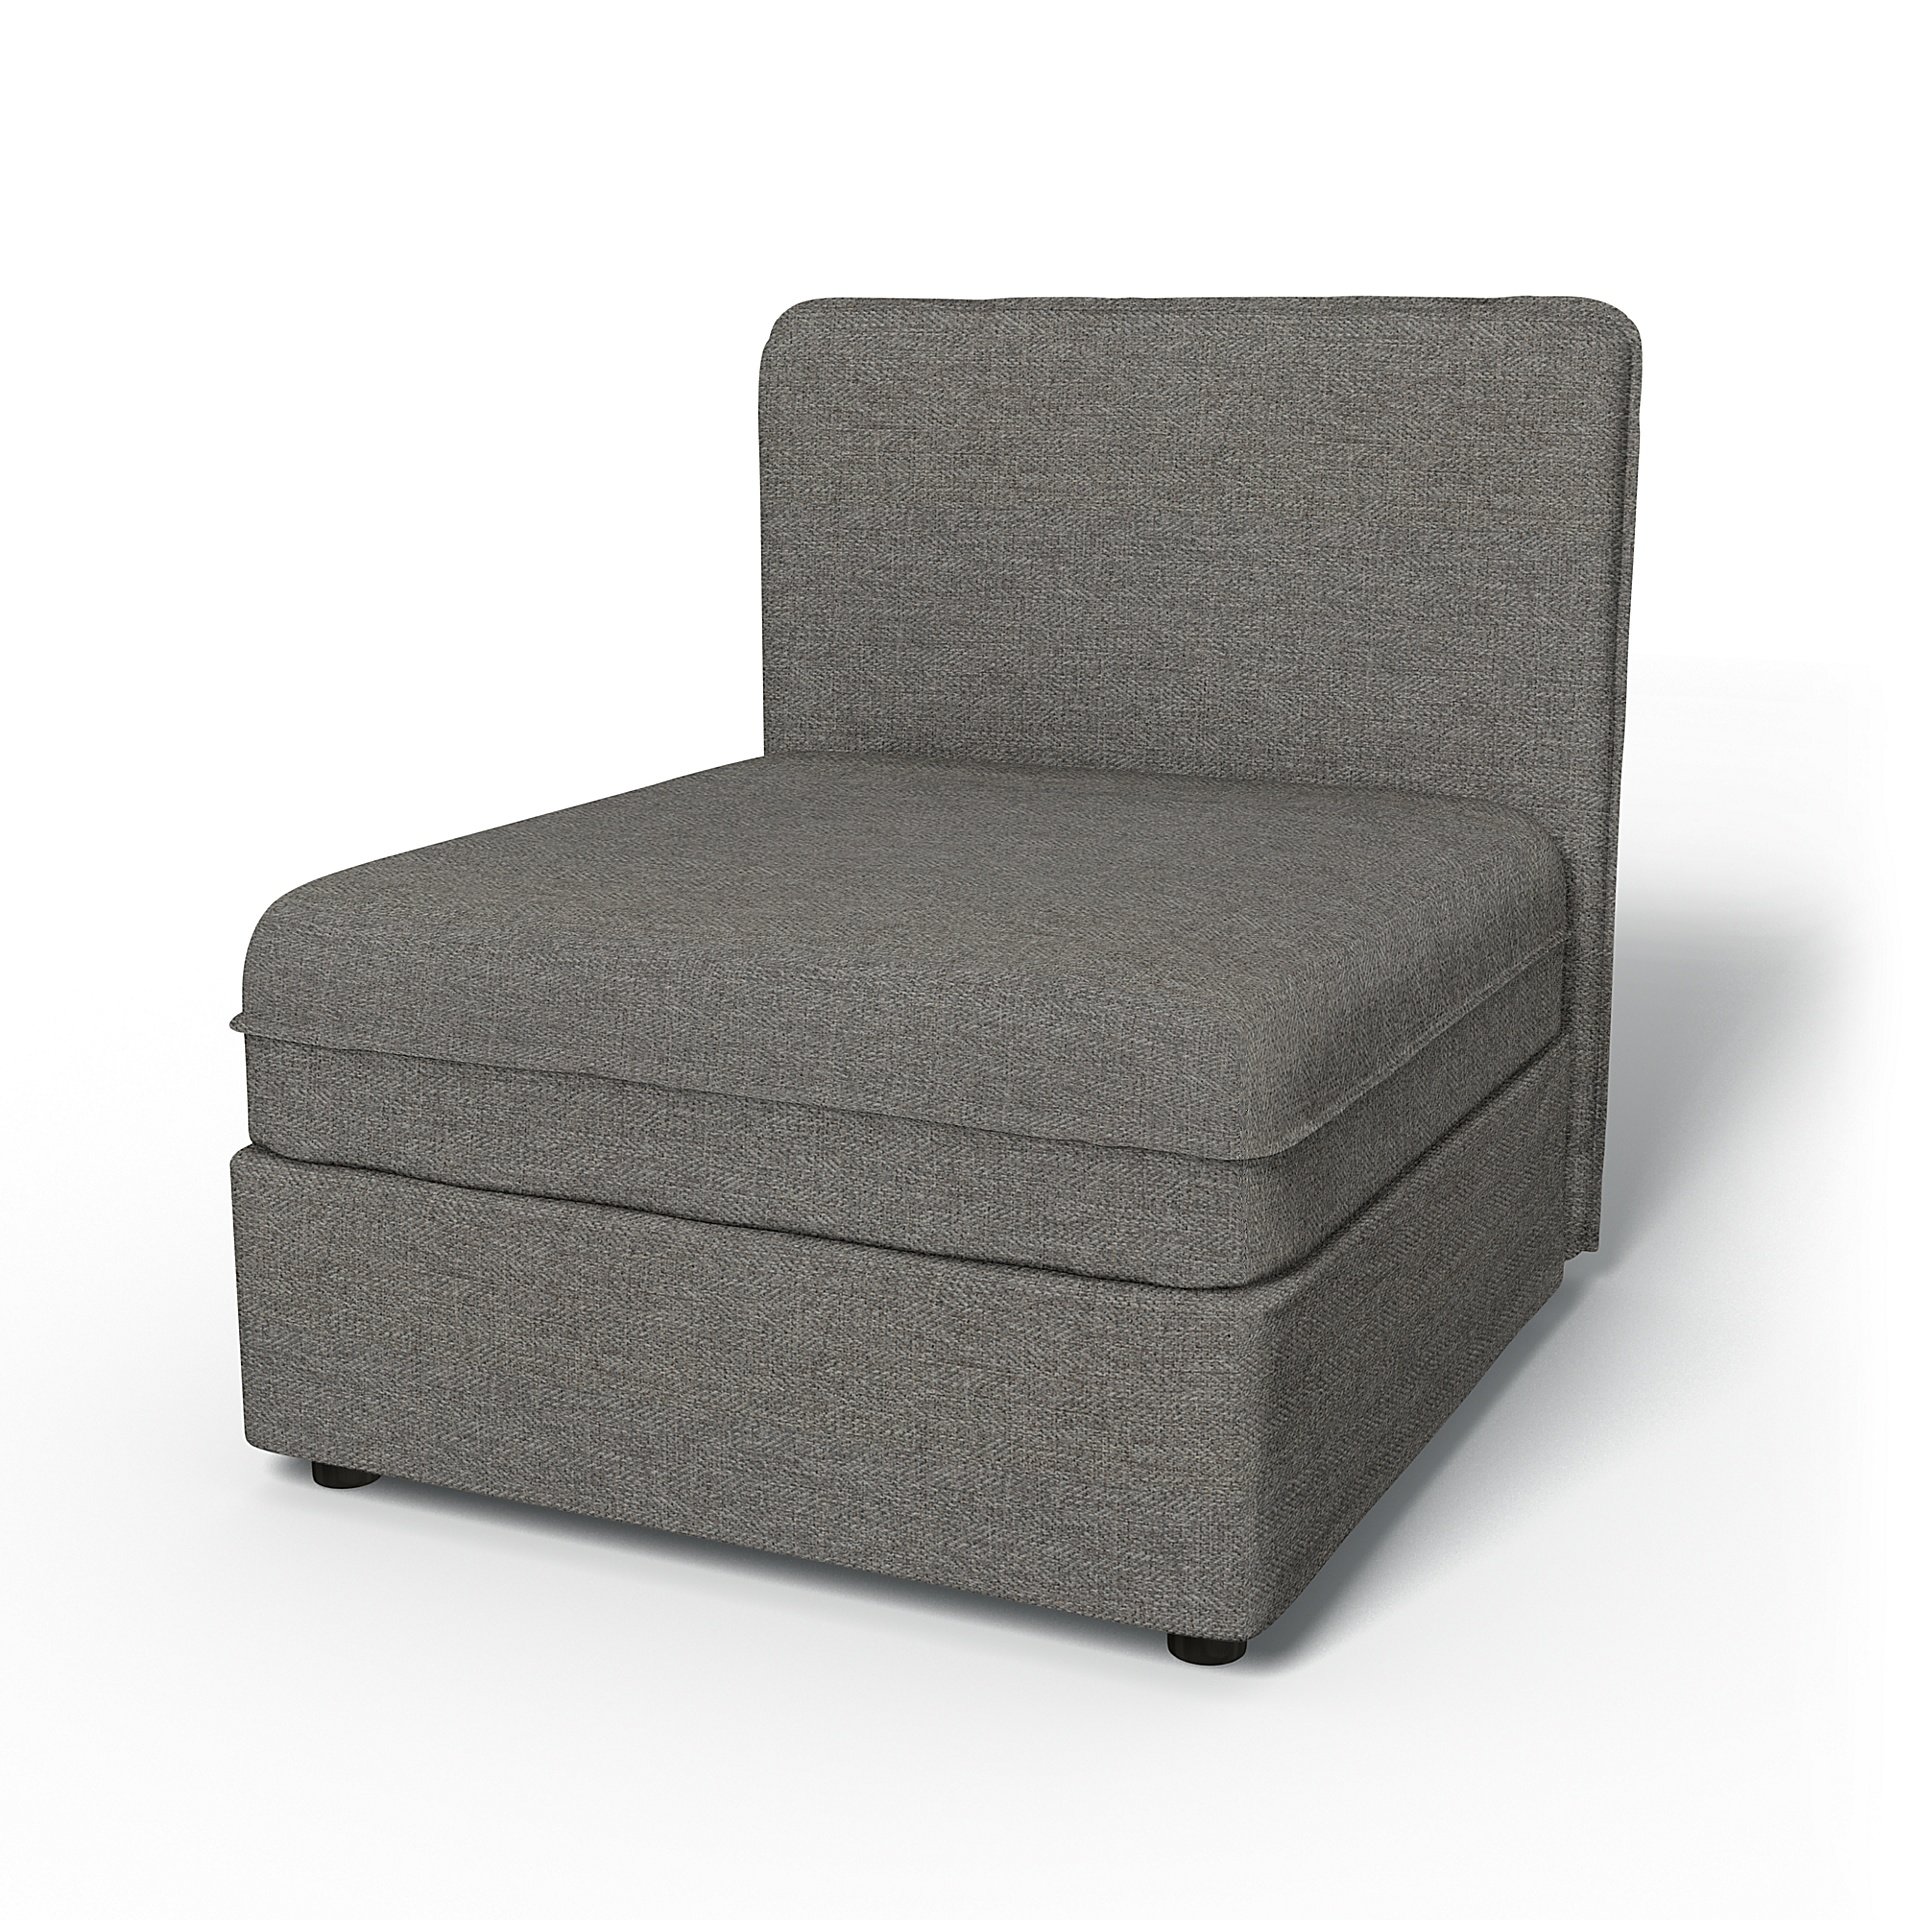 IKEA - Vallentuna Seat Module with Low Back Cover 80x80cm 32x32in, Taupe, Boucle & Texture - Bemz